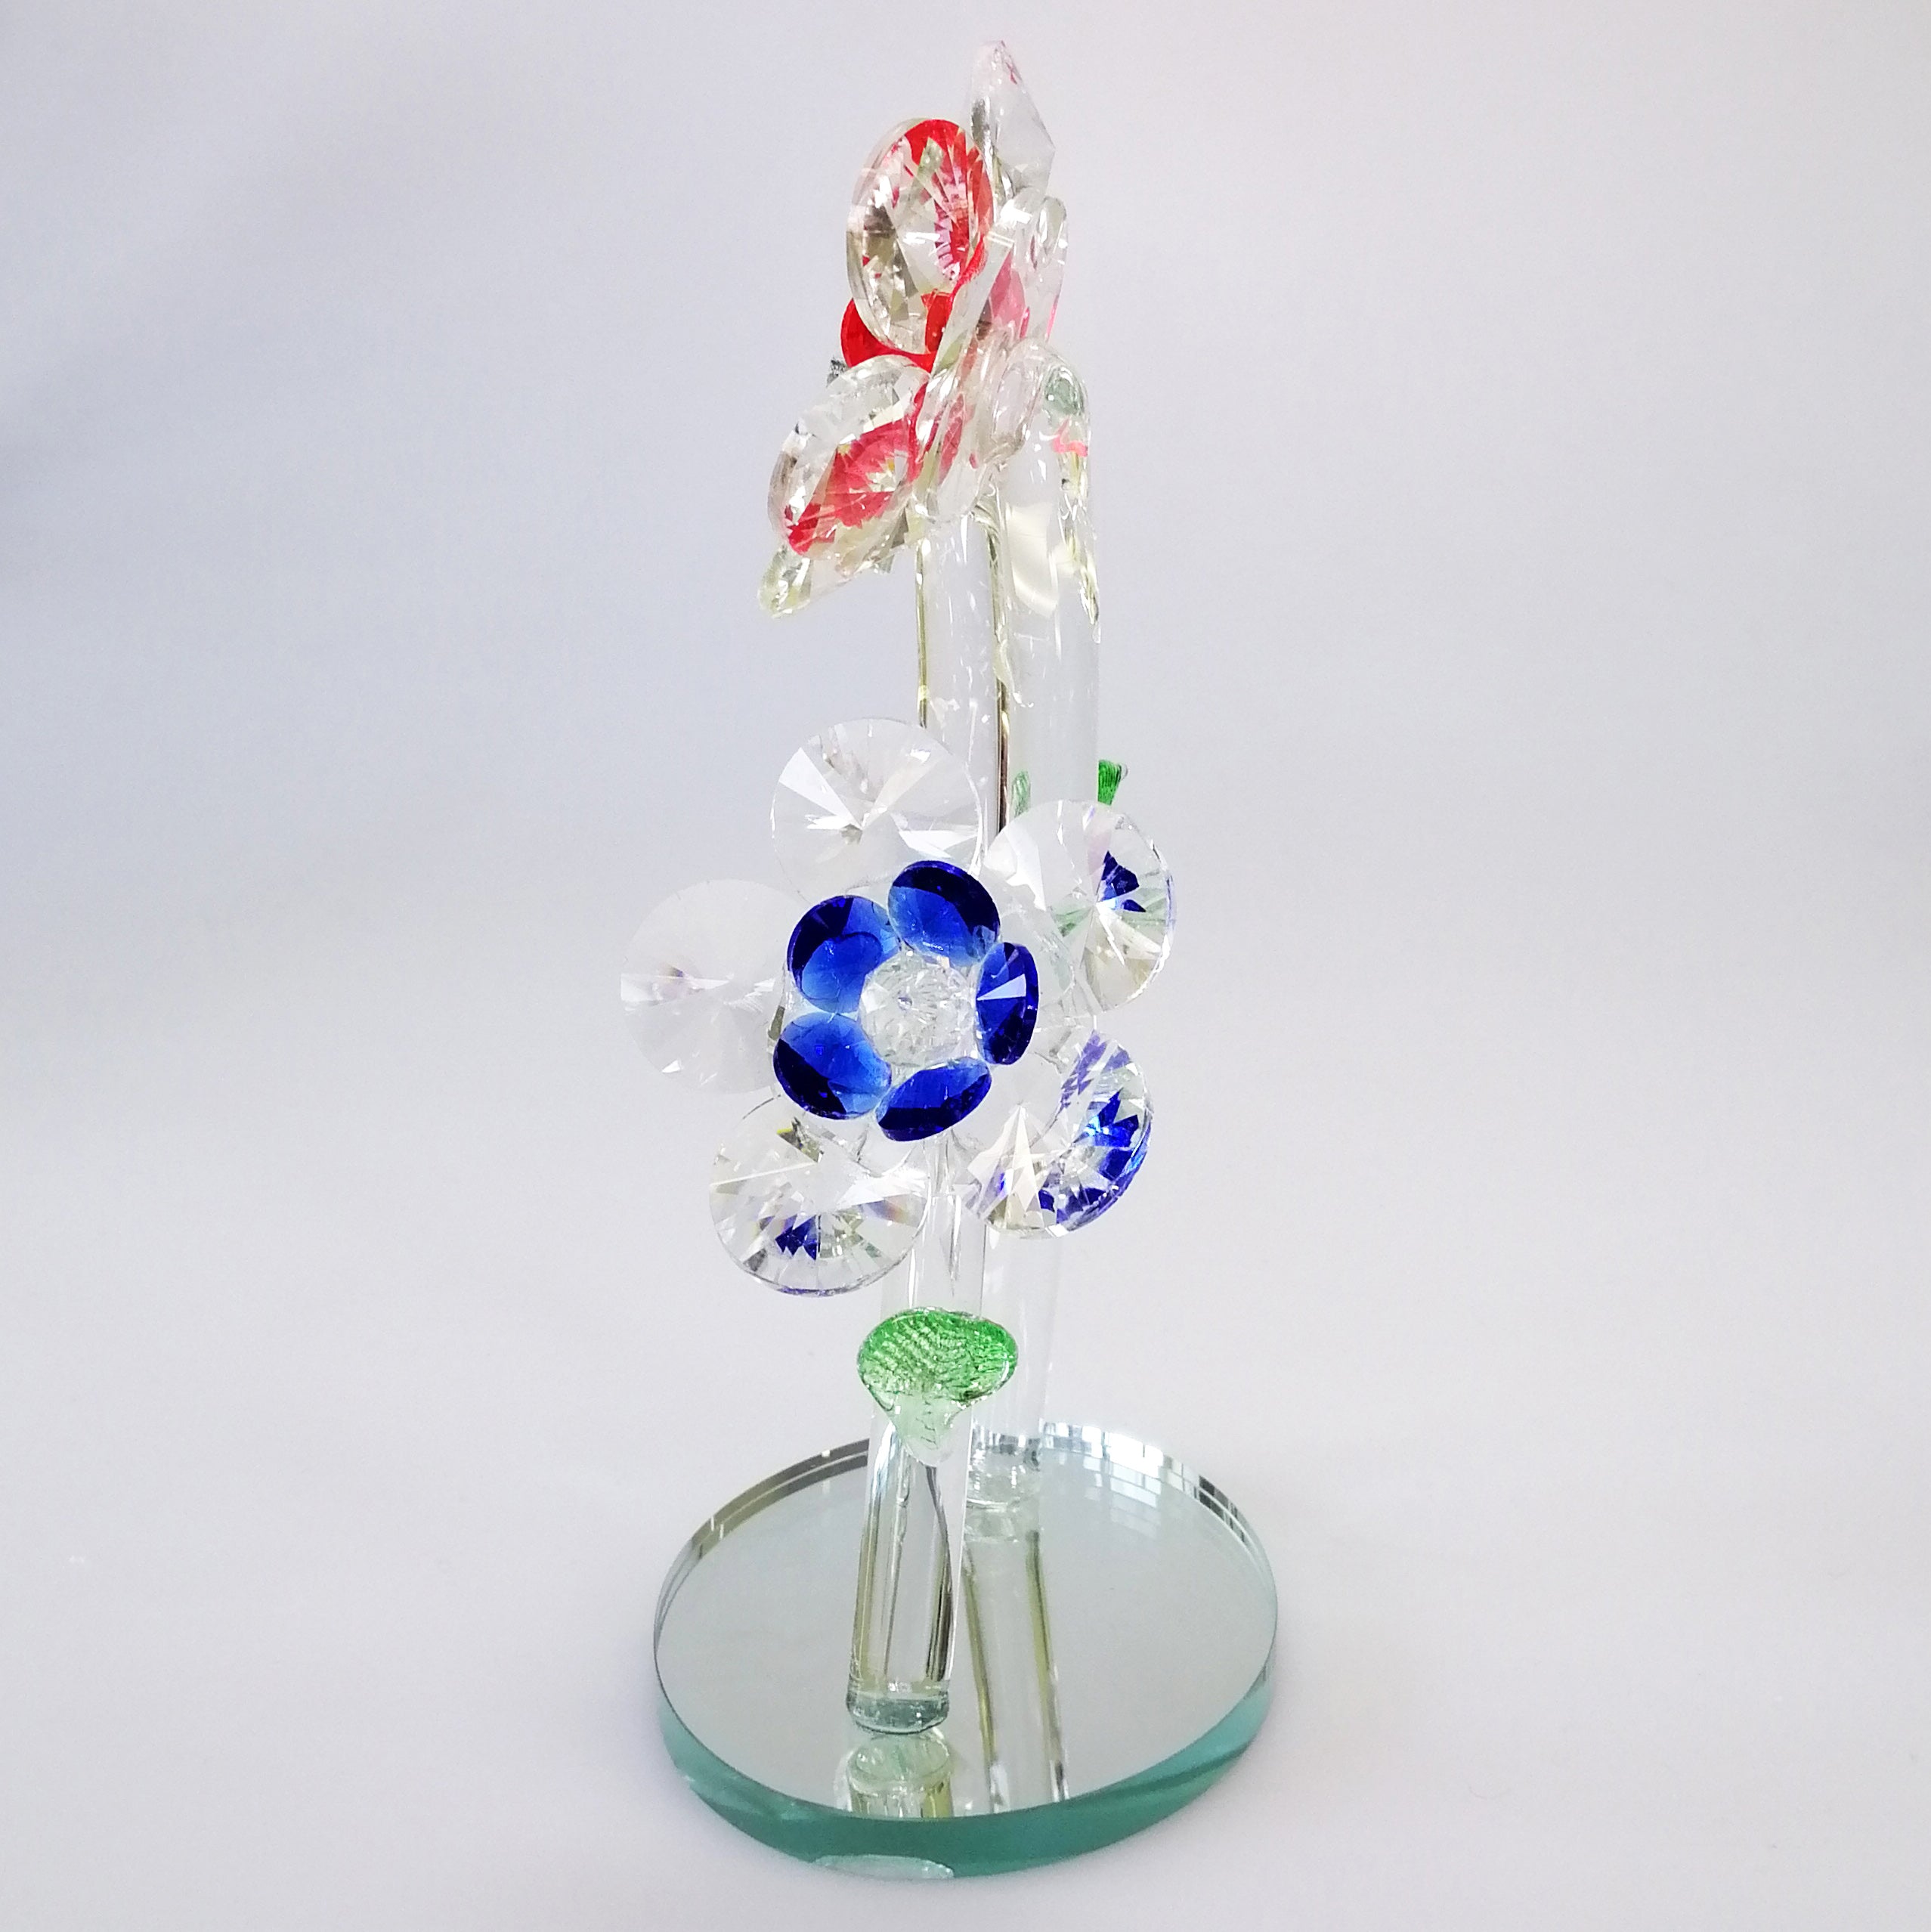 Cut Glass Mixed Colour Flowers on Mirror Base